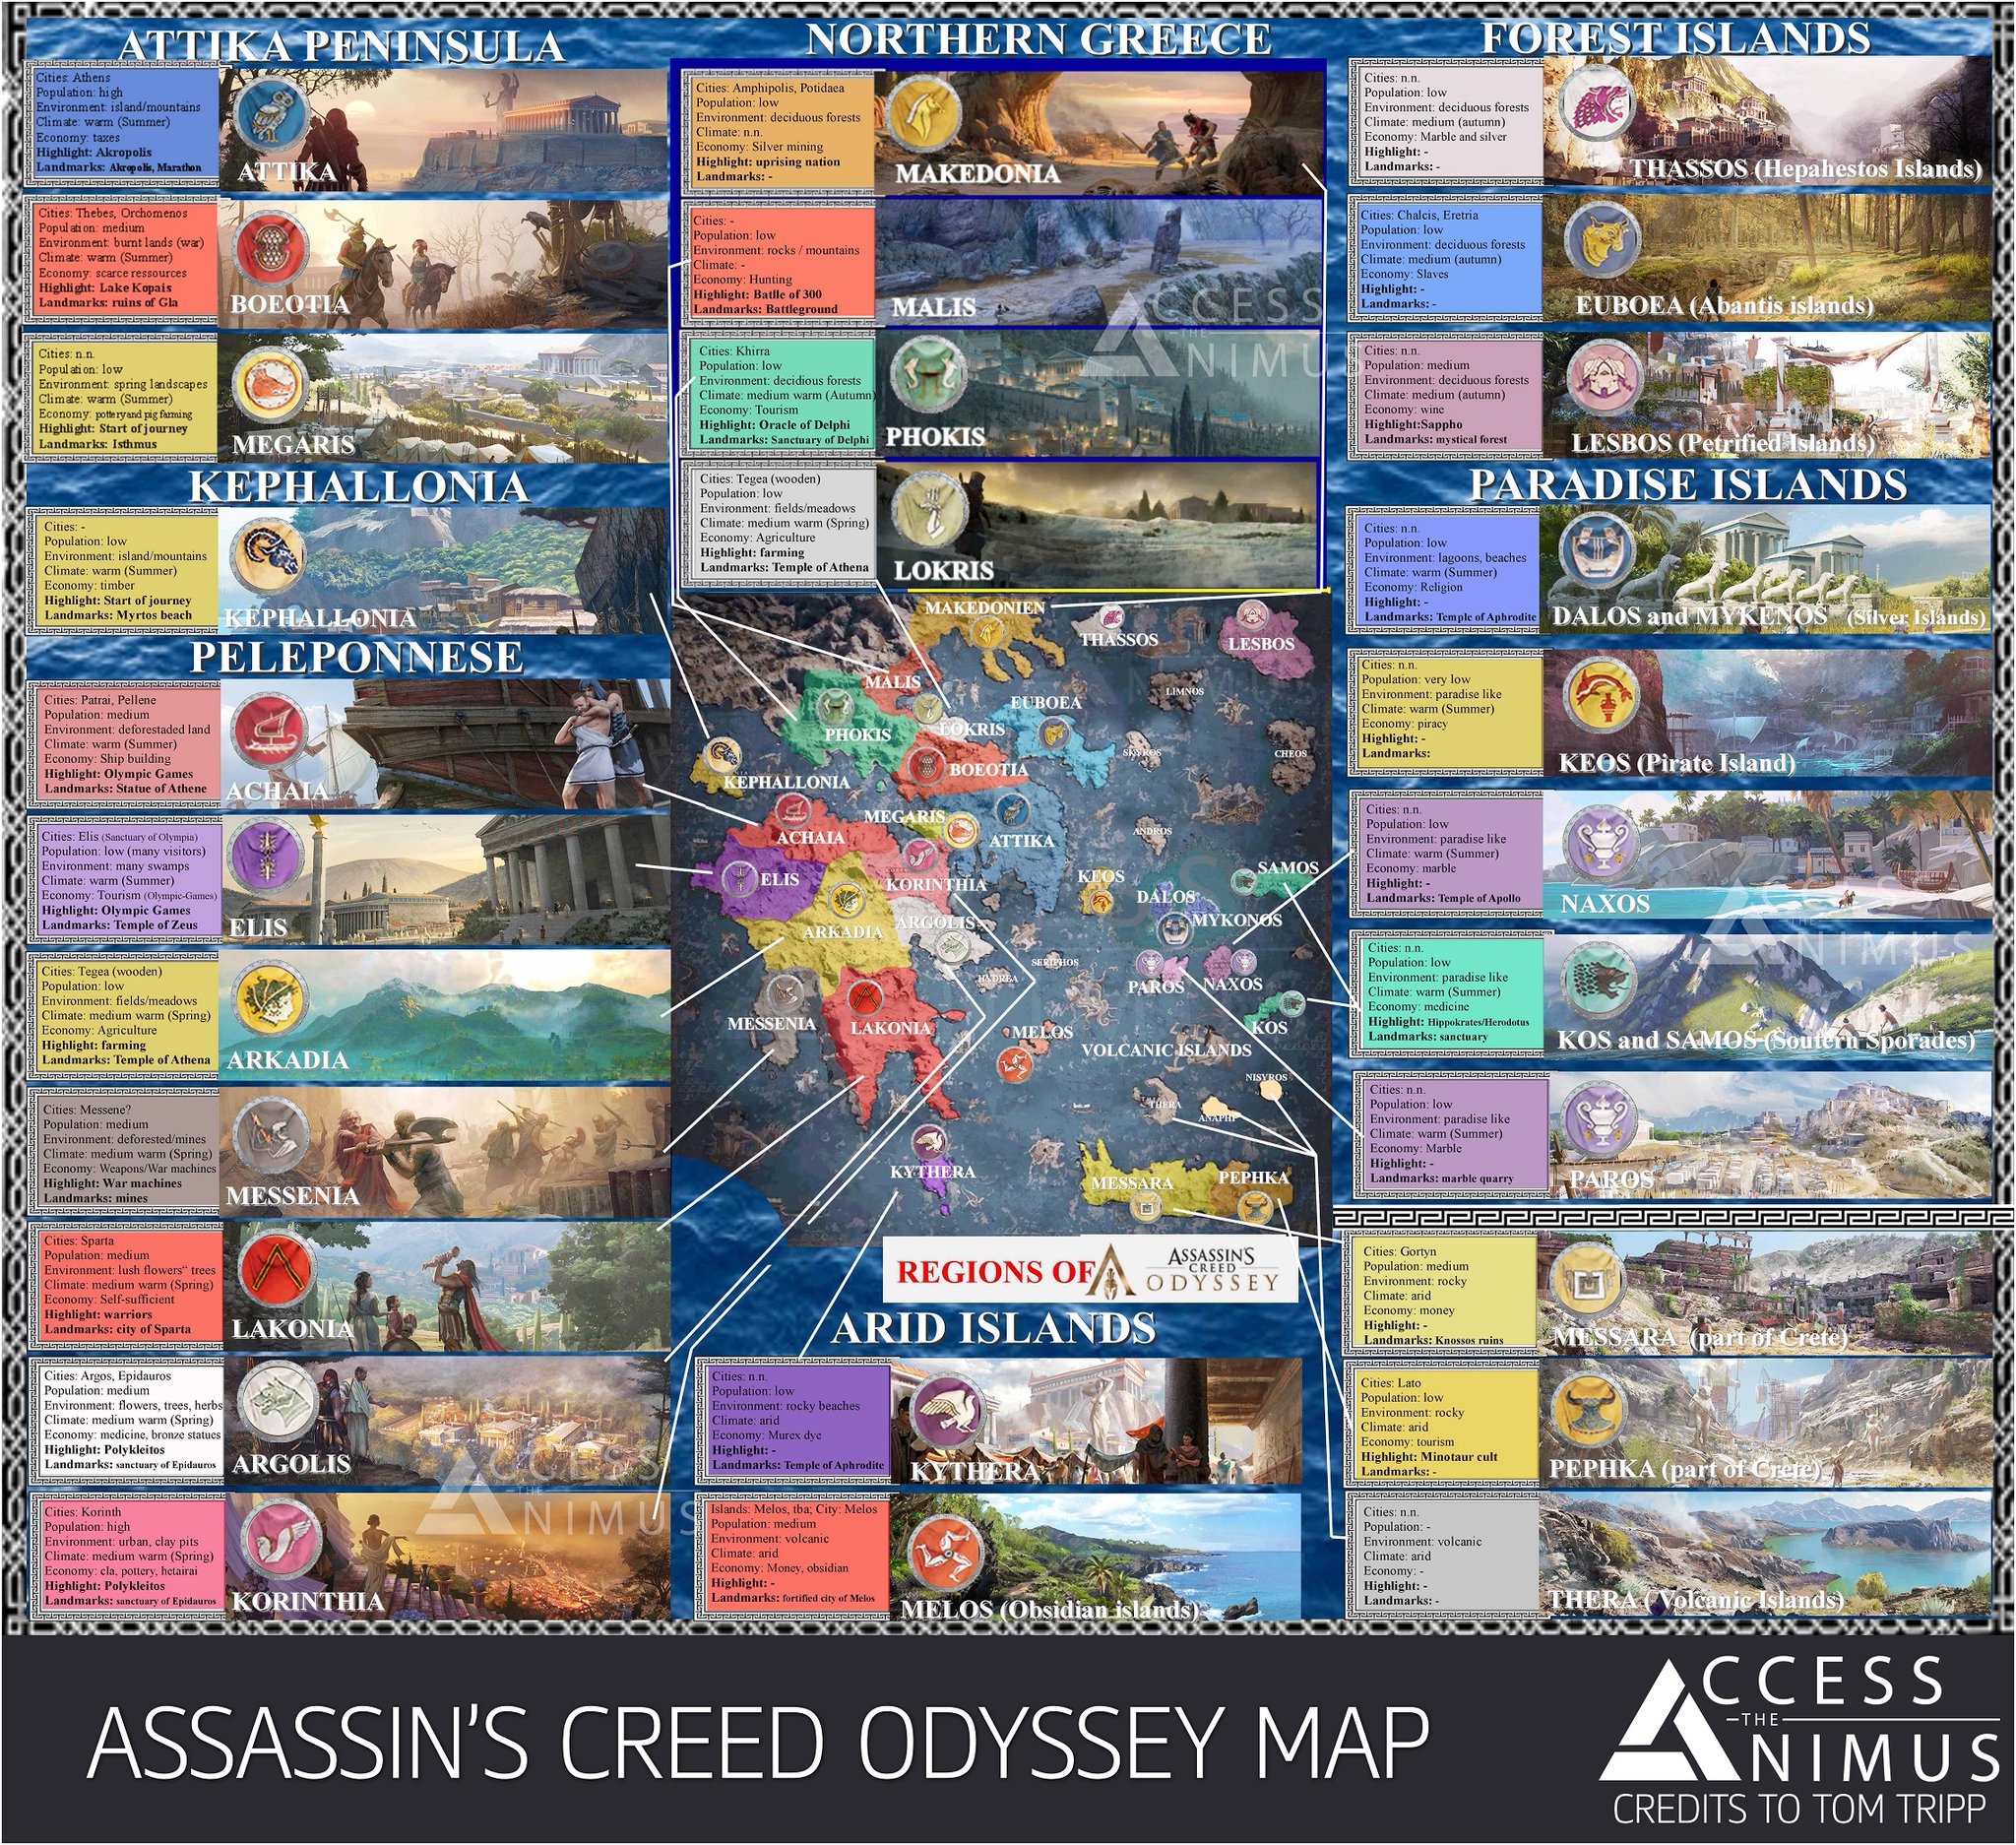 Assassin's Creed Odyssey Map